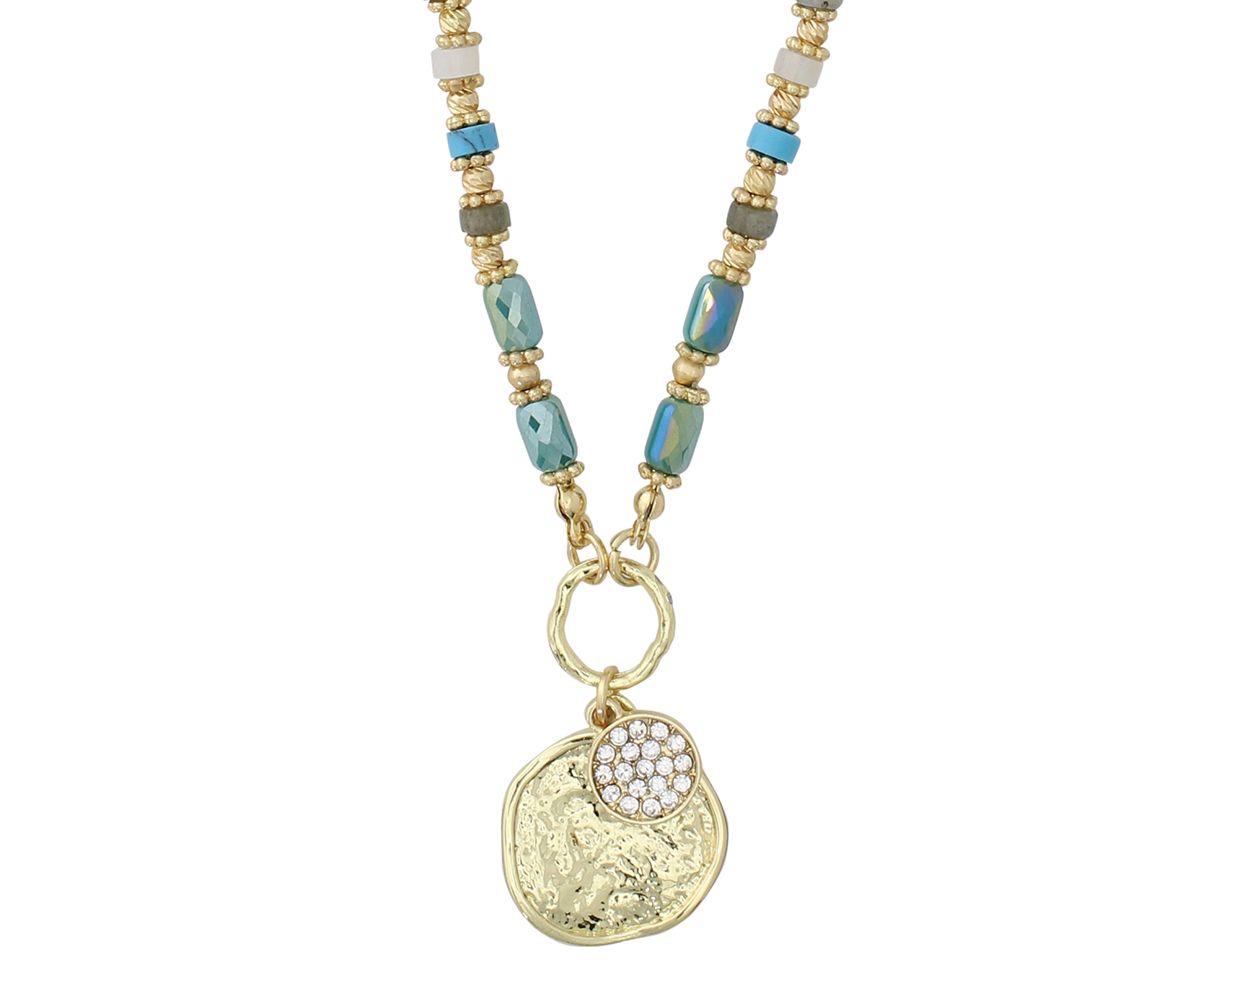 Periwinkle Beaded Hammered Disc Necklace